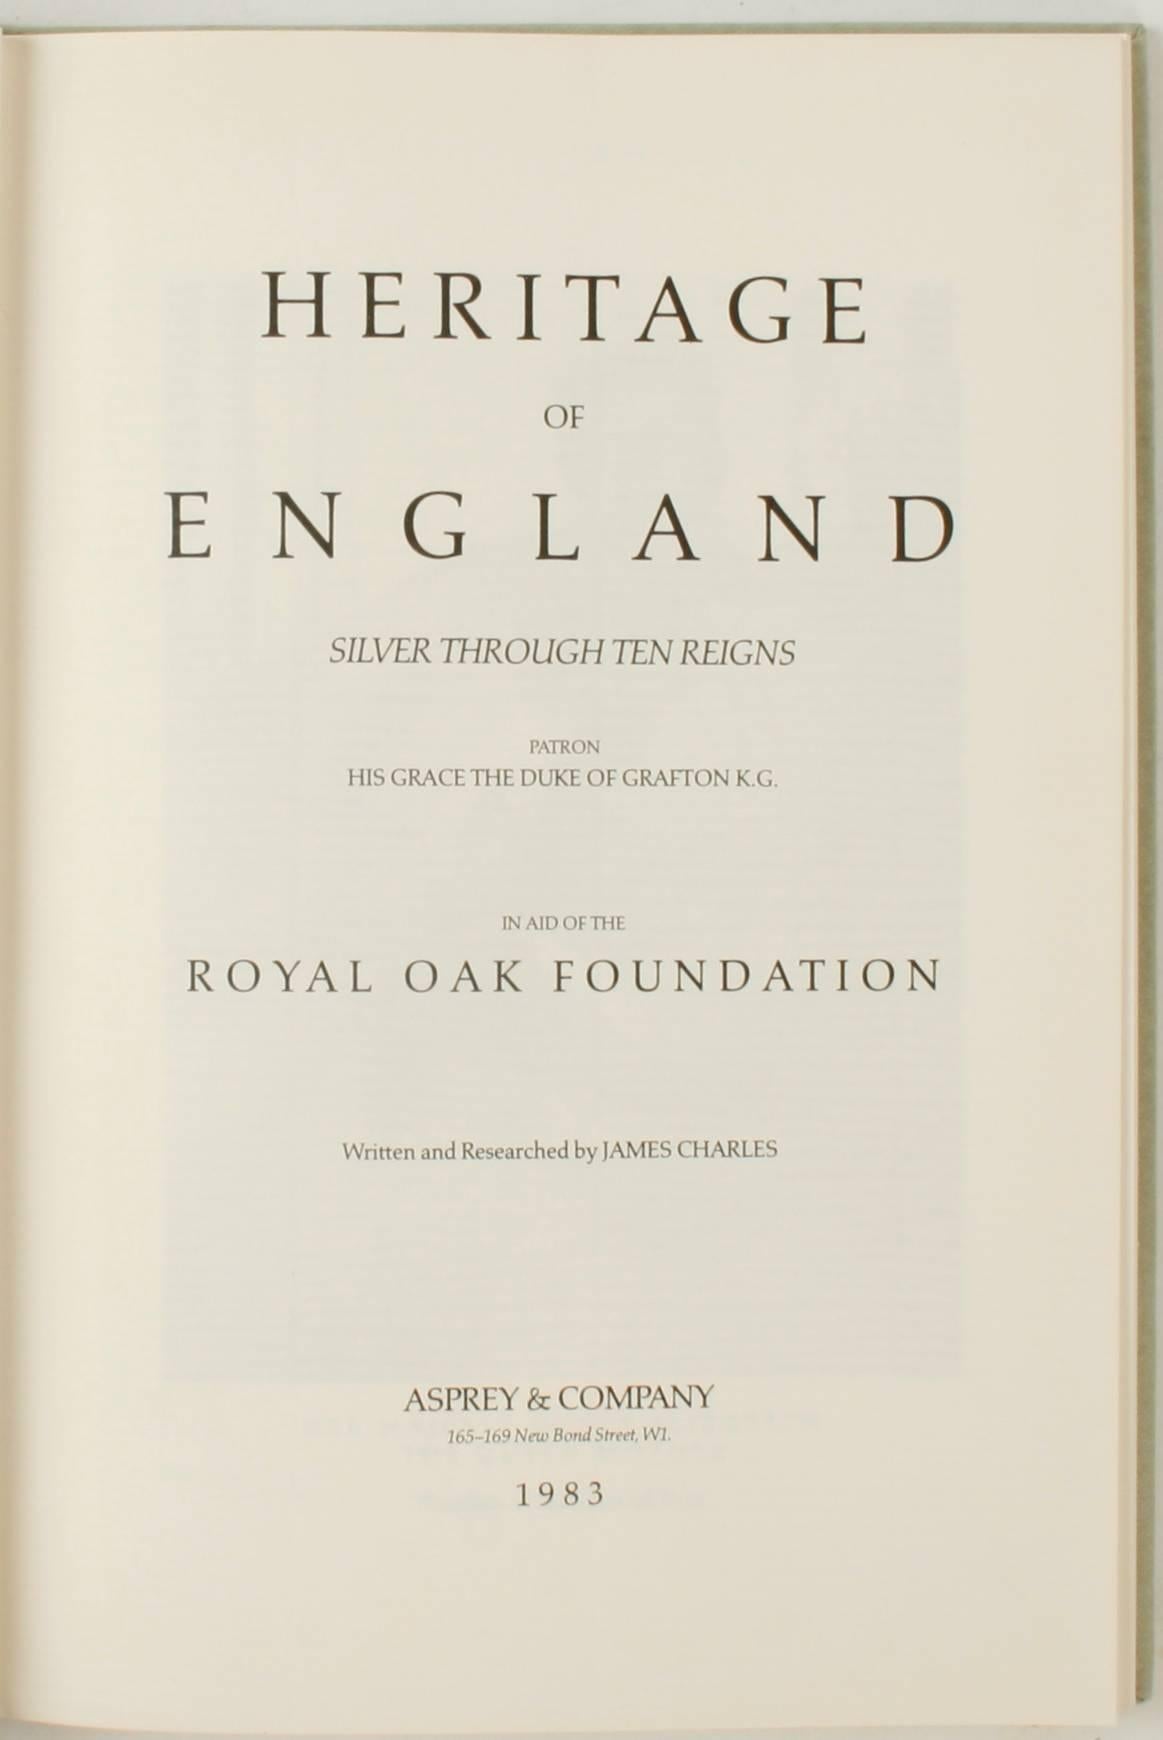 Heritage of England: Silver Through Ten Reigns by James Charles. London: Asprey and Co., 1983. First edition hardcover, no dust jacket as issued. Exhibition catalogue of silver, many pieces drawn from private as well as royal collections, produced